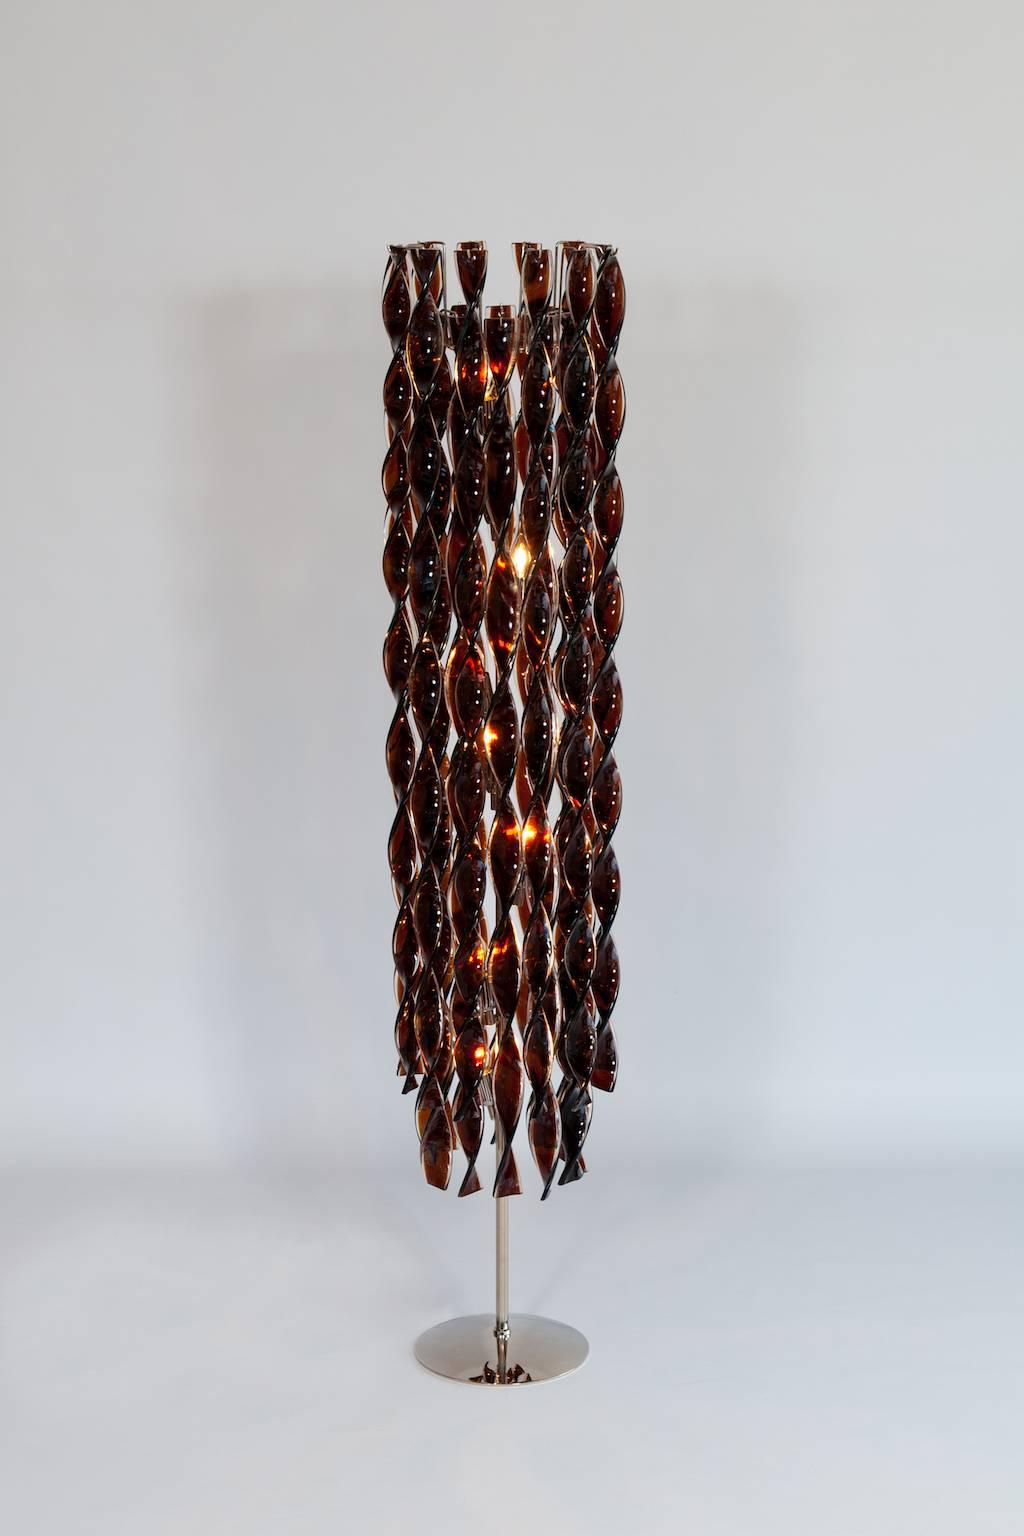 Italian Floor Lamp in Murano Glass with Twisted Tobacco-Colored Elements, 1980s For Sale 3